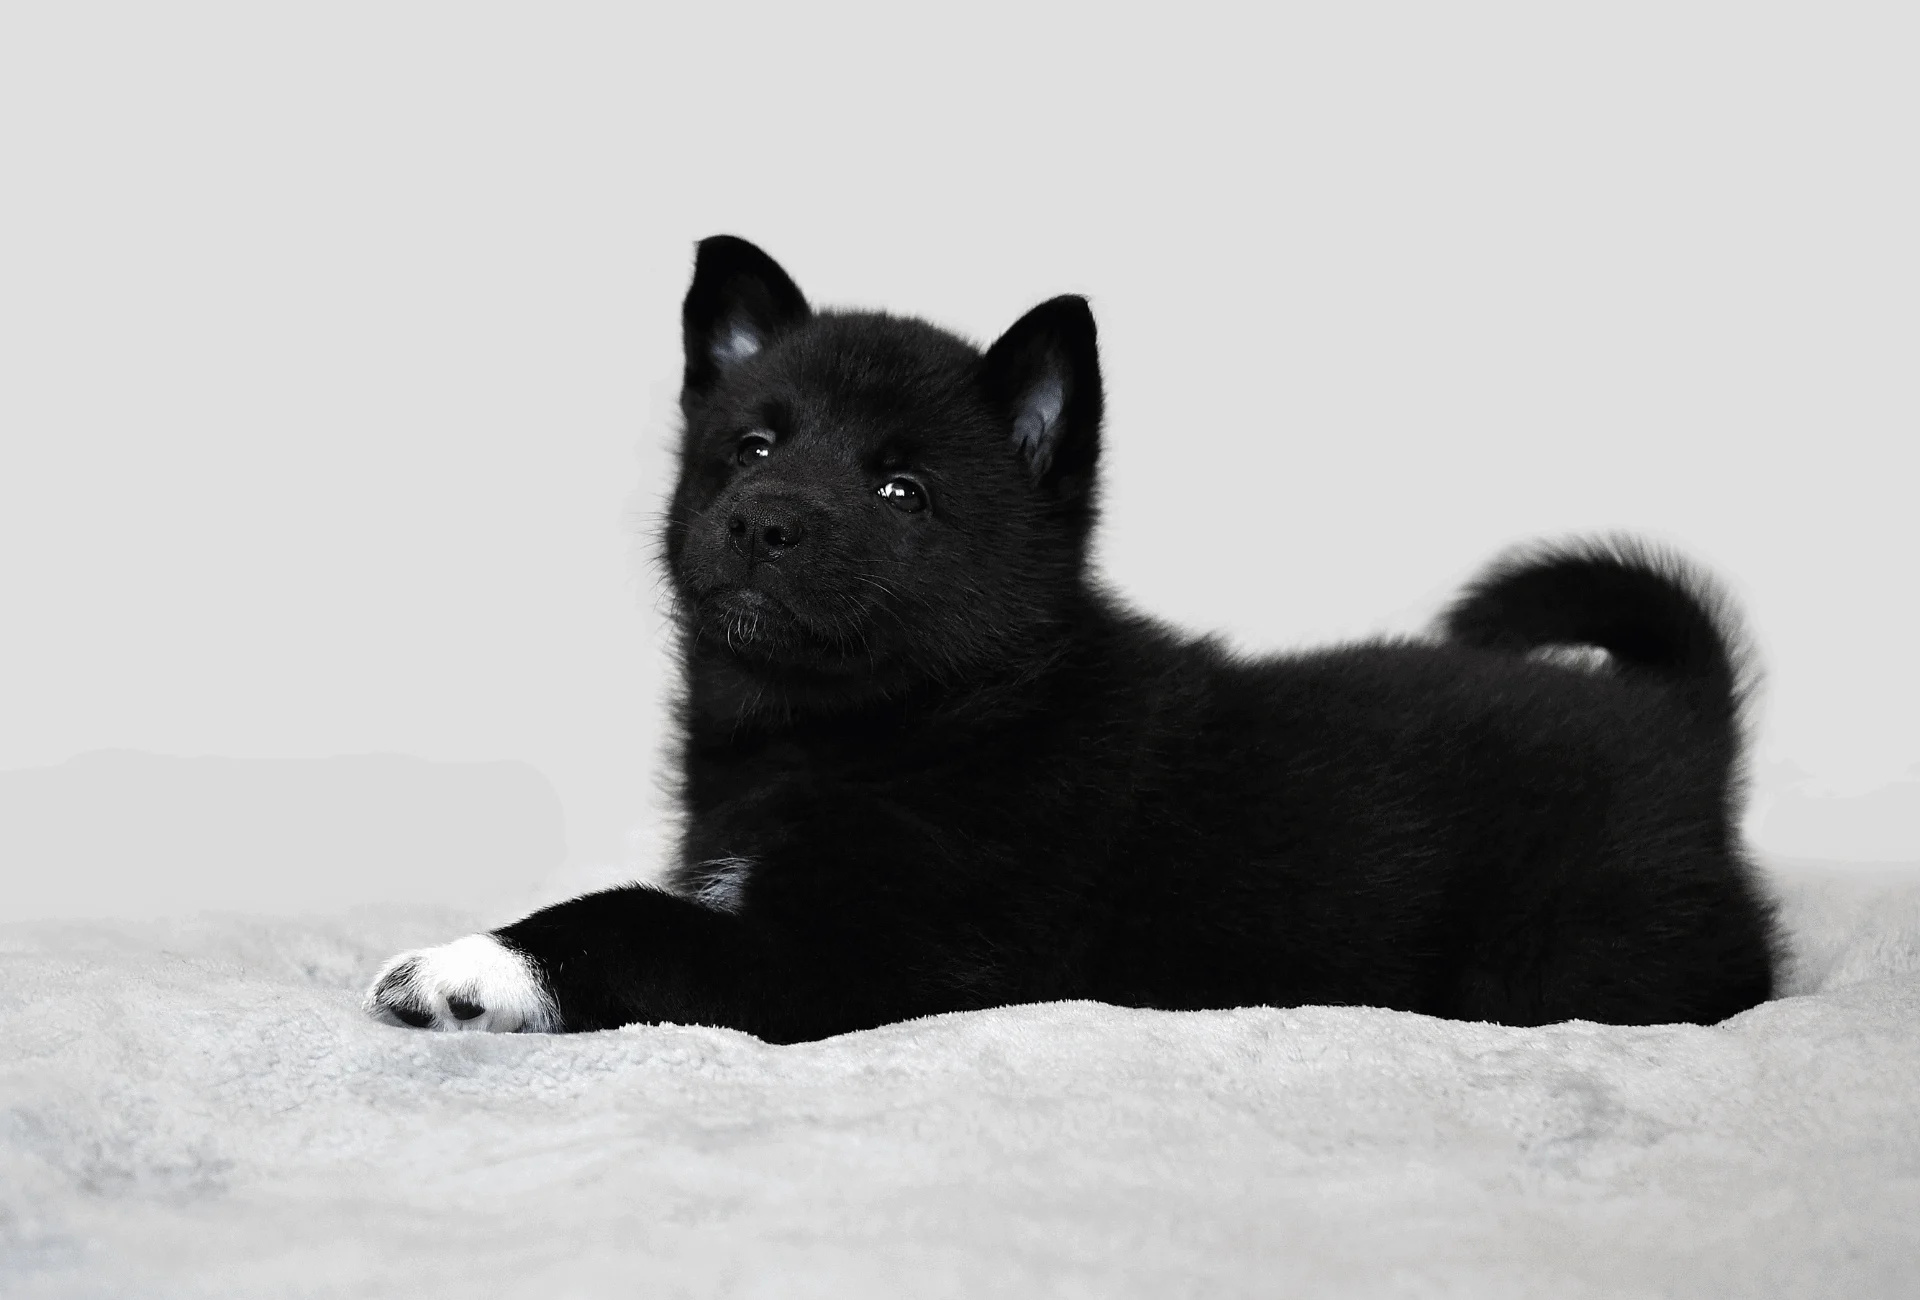 All black Husky puppy with white paws.